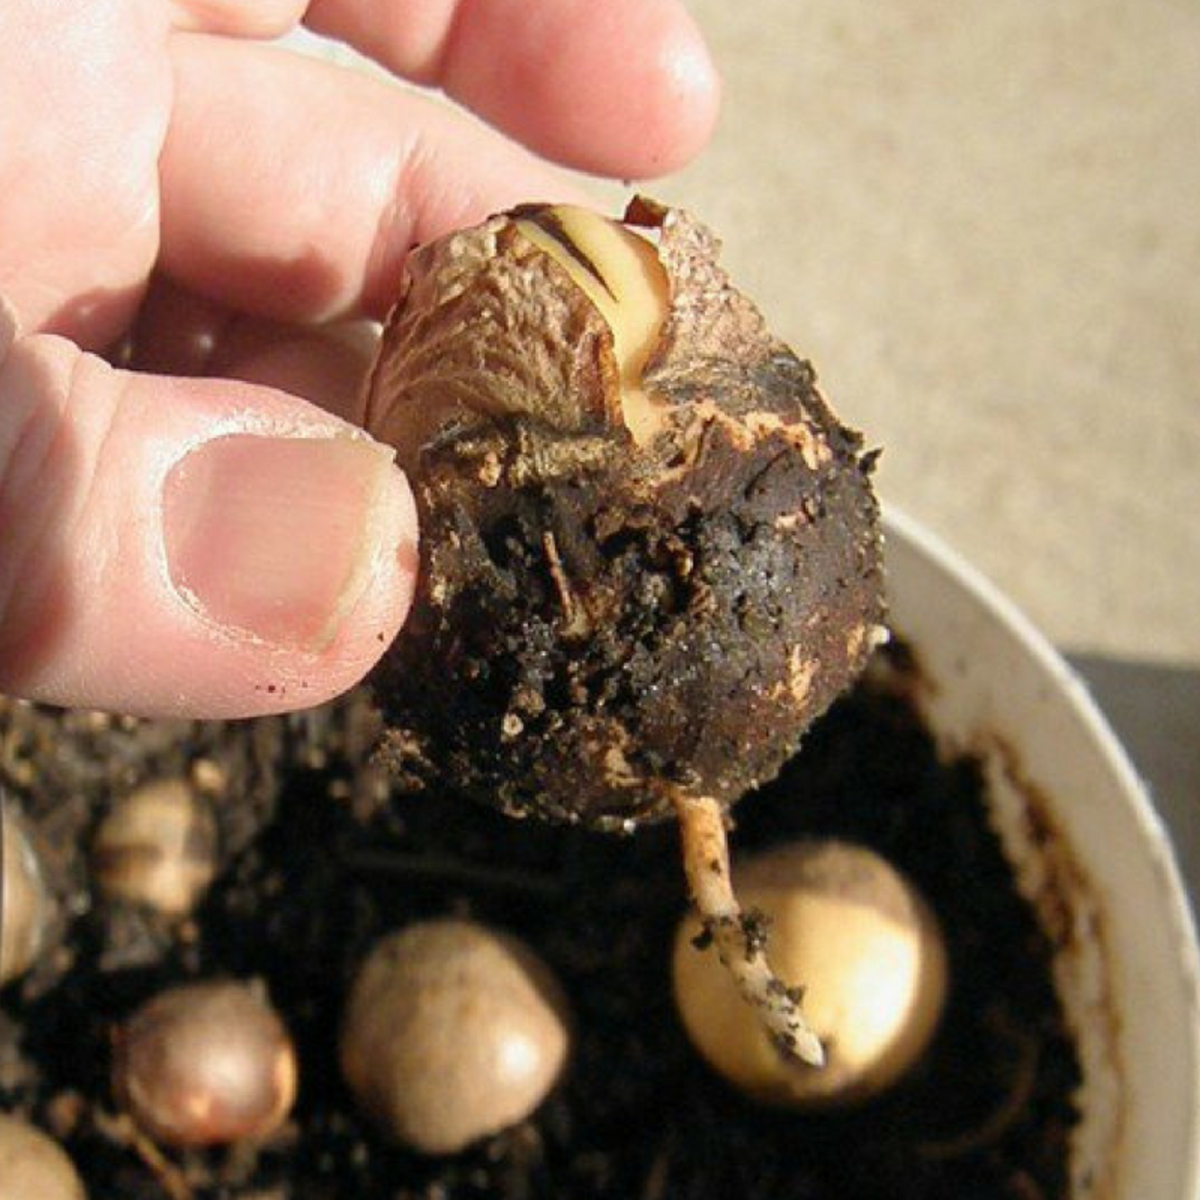 It may take a few weeks before the avocado seed sprouts the root and stalk. 